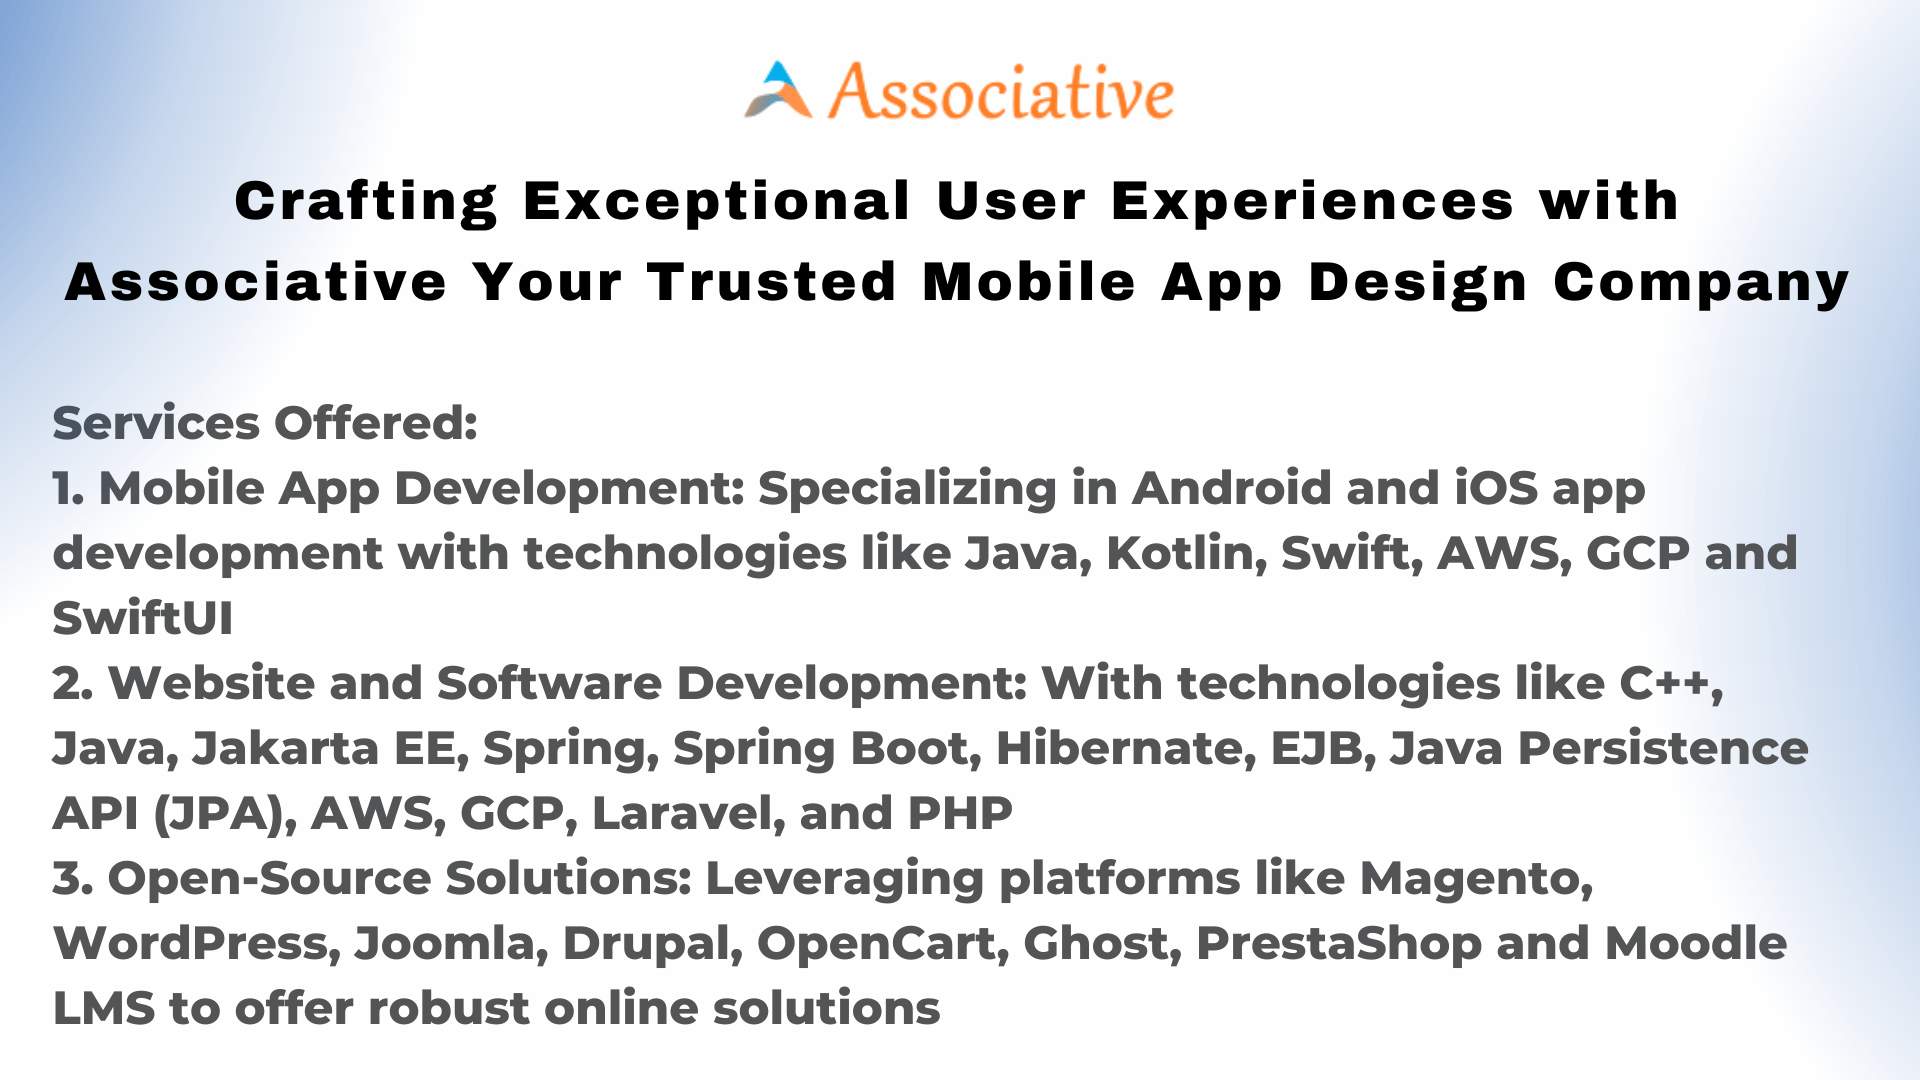 Crafting Exceptional User Experiences with Associative Your Trusted Mobile App Design Company